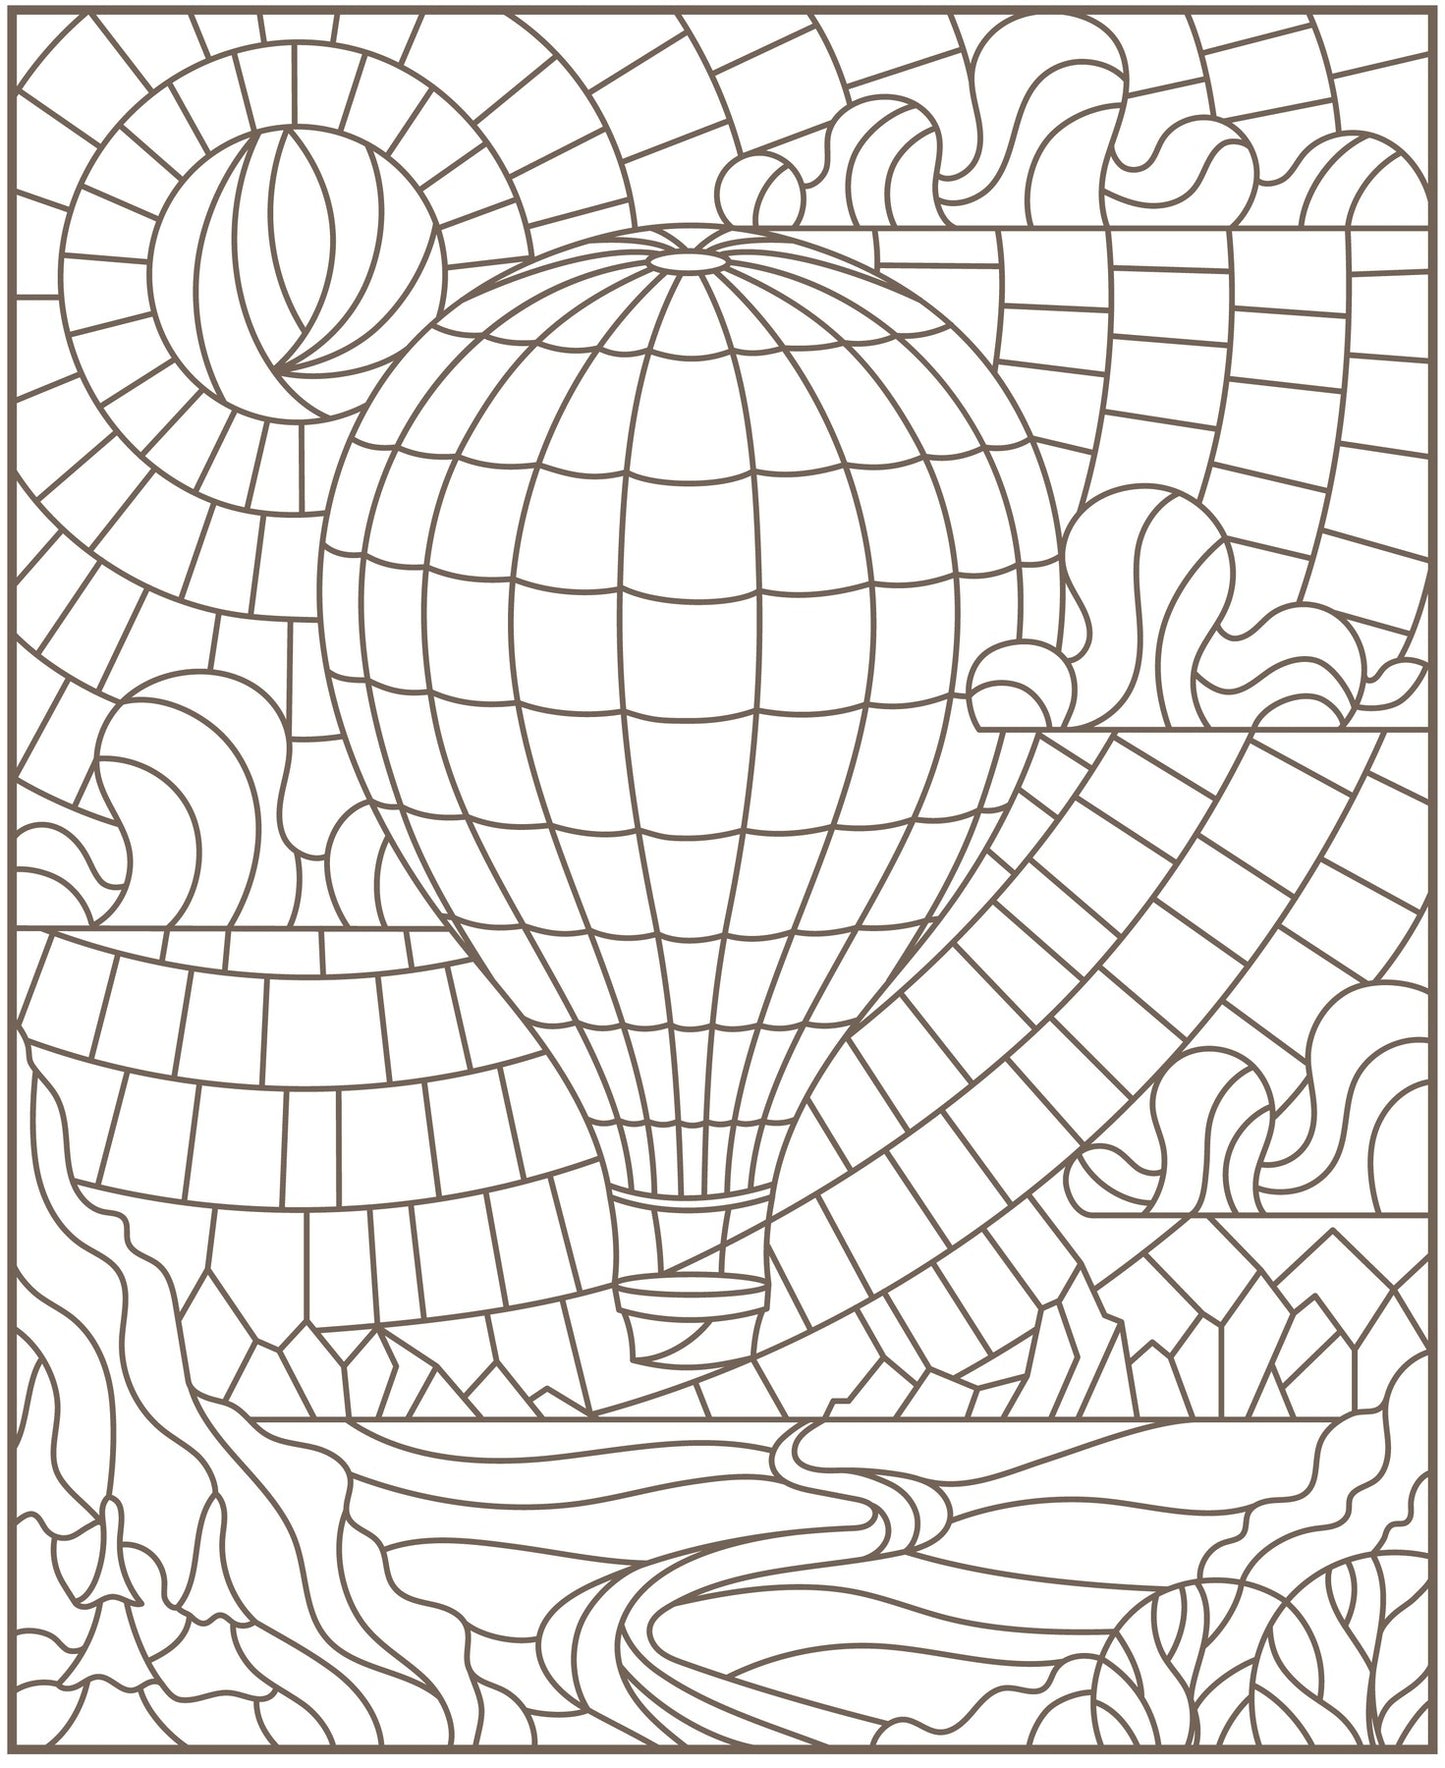 Stained Glass Art Scenic Landscapes, Mosaic Ocean, Picturesque Castles & Ships PDF Coloring Book